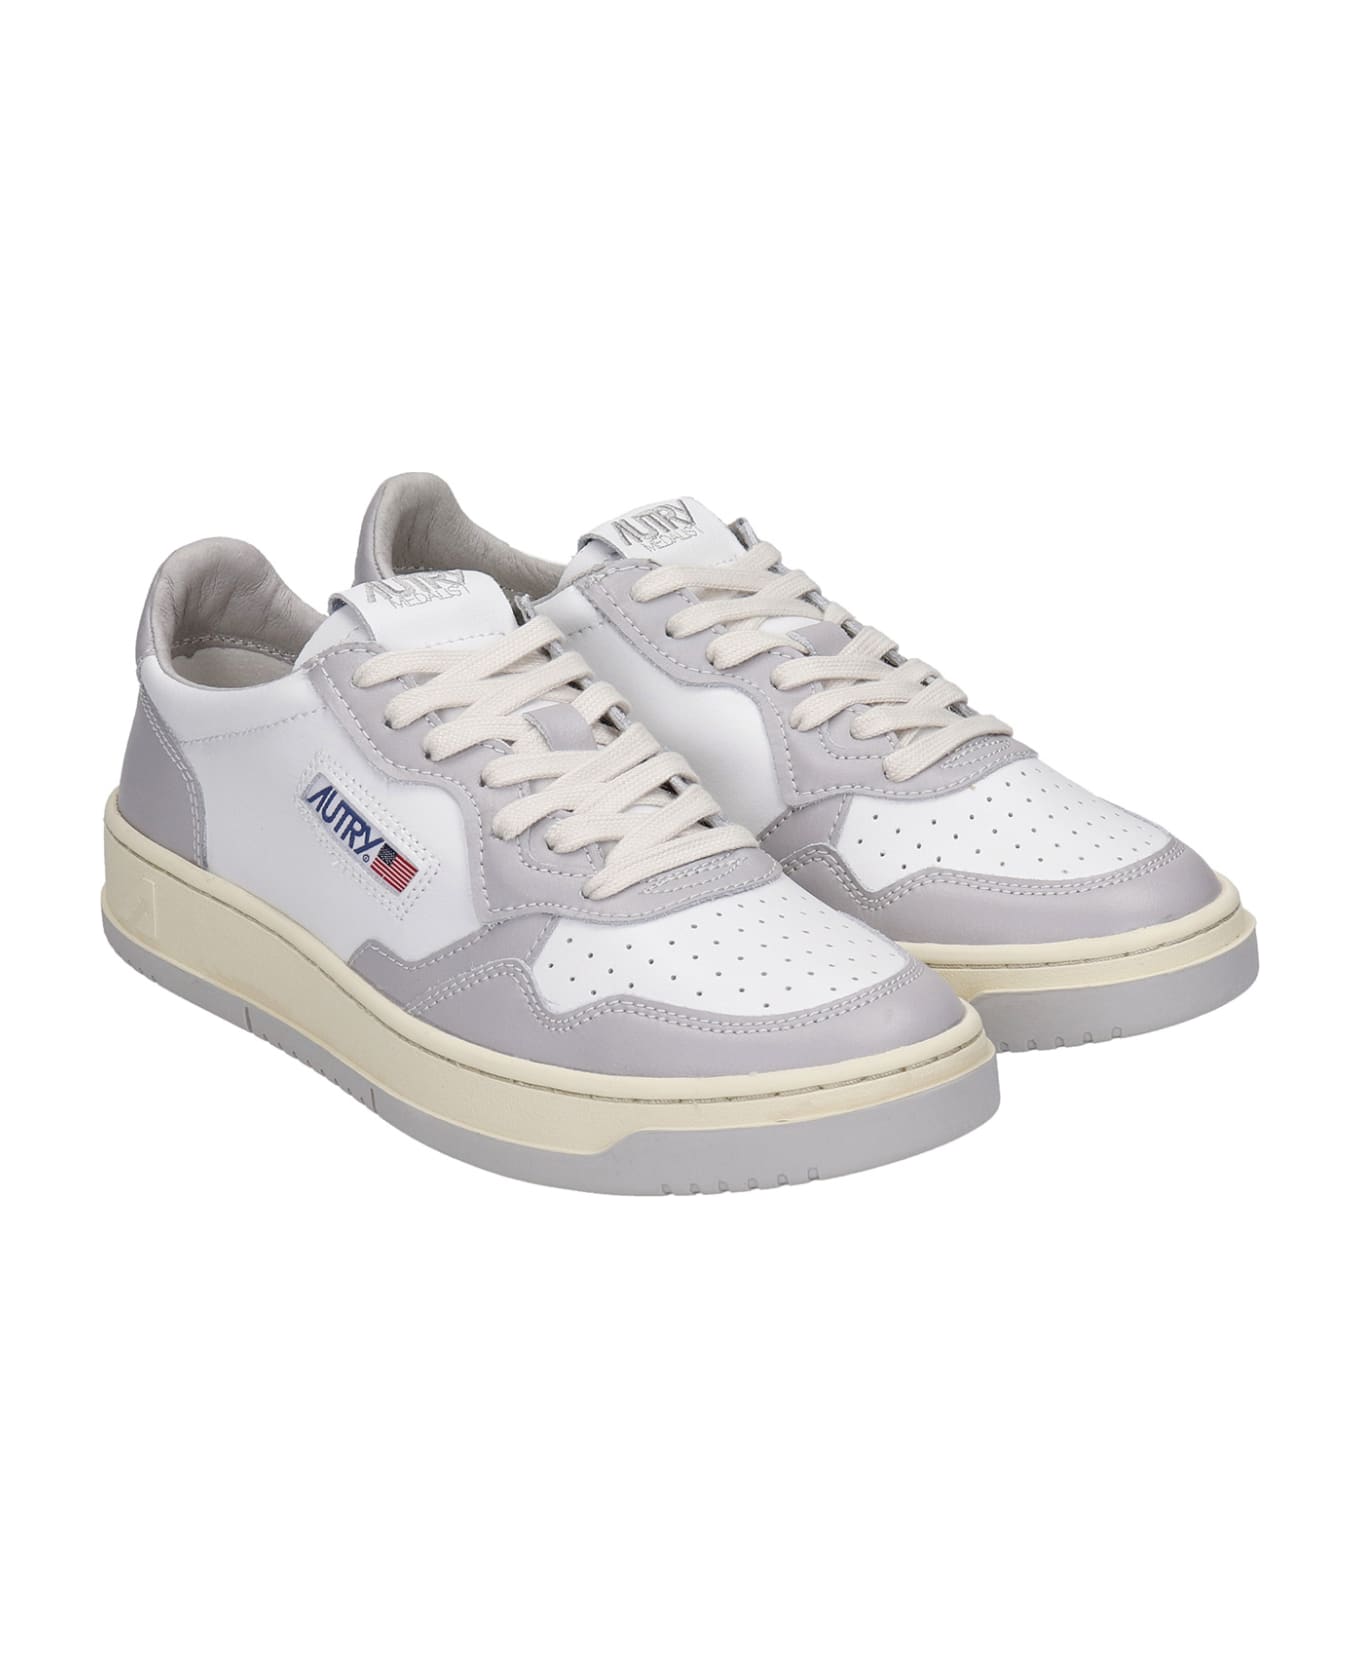 Autry 01 Sneakers In White Leather - Bianco